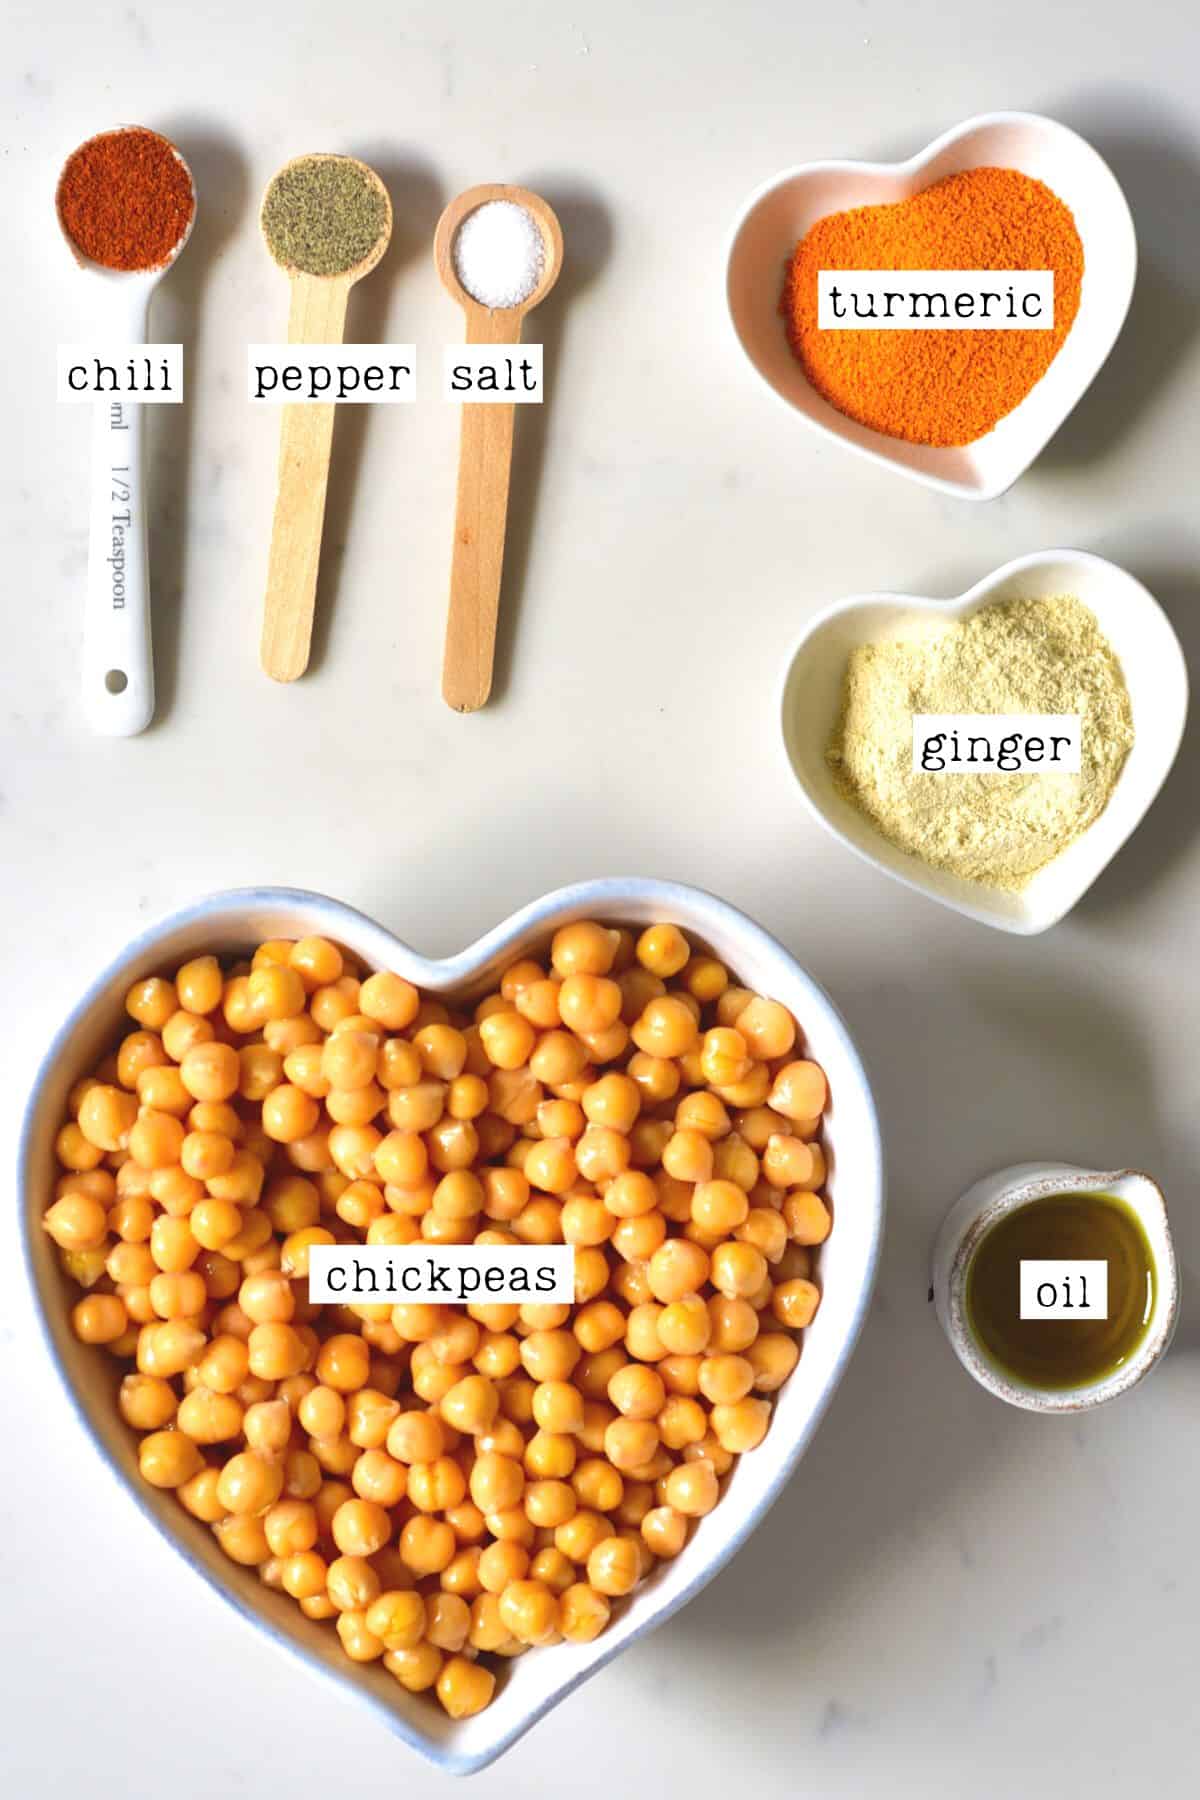 Ingredients for roasted chickpeas